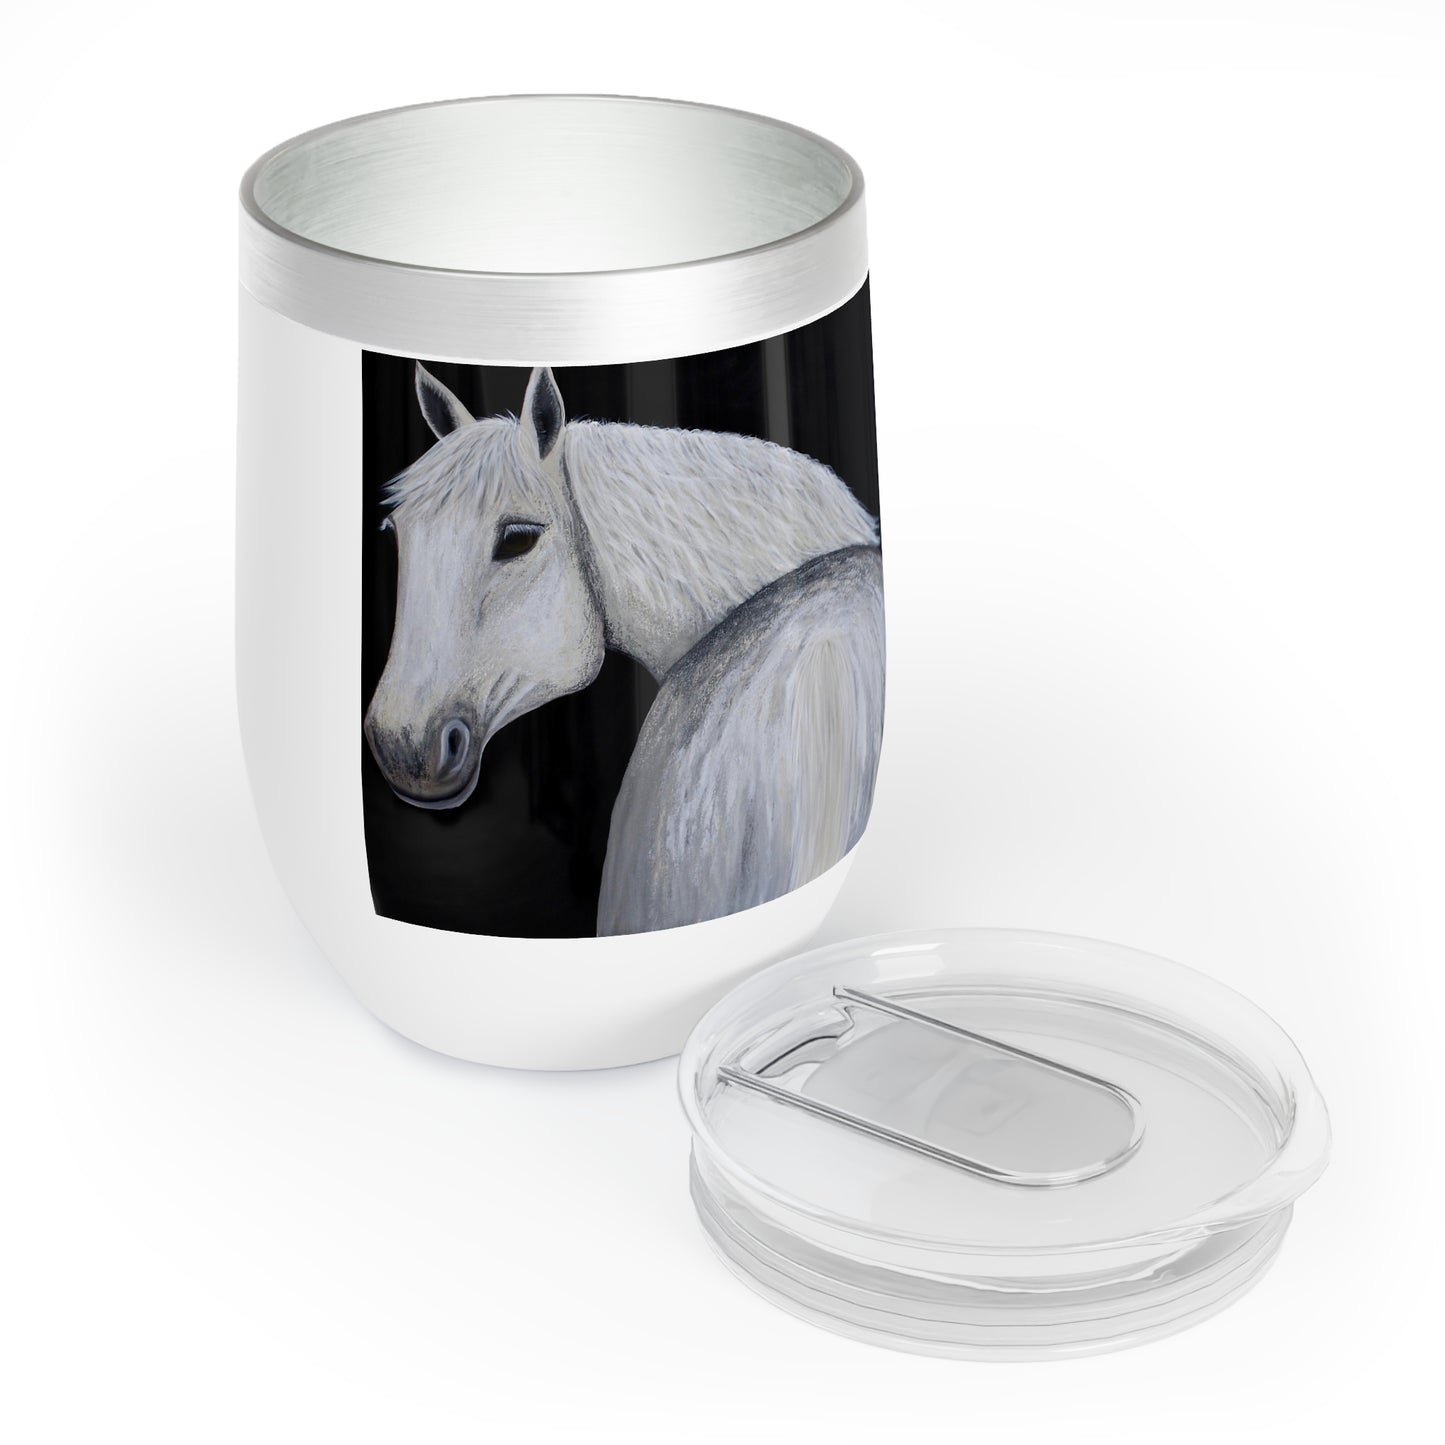 Horse wine cooler - Chill Wine Tumbler - Drinks Tumbler - Ghost